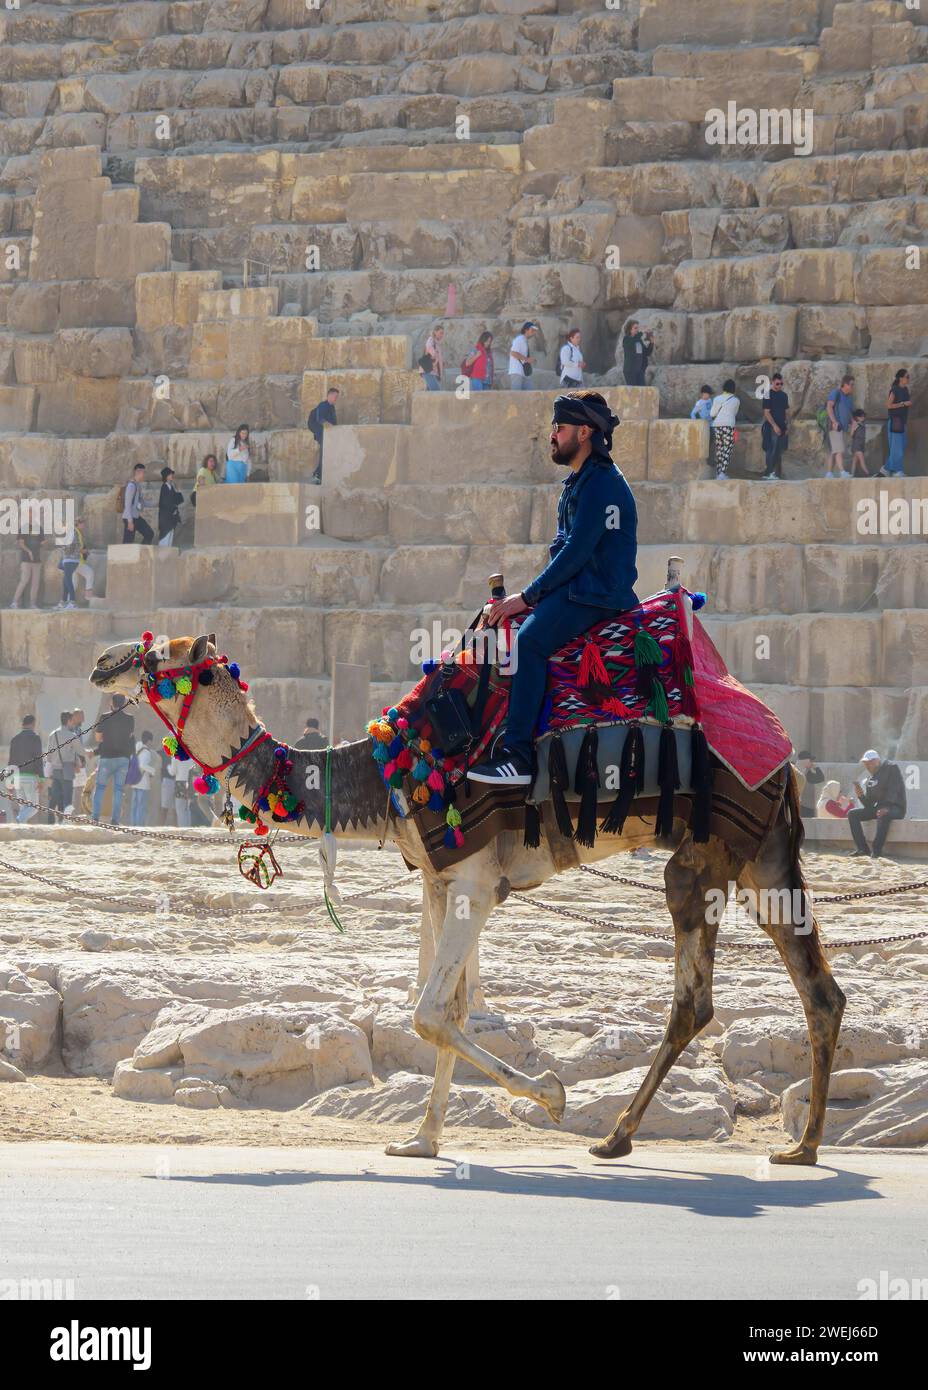 Tourist on a camel ride in front of the Great Pyramid of Giza,  the oldest of the Seven Wonders of the World, Cairo, Egypt. Stock Photo